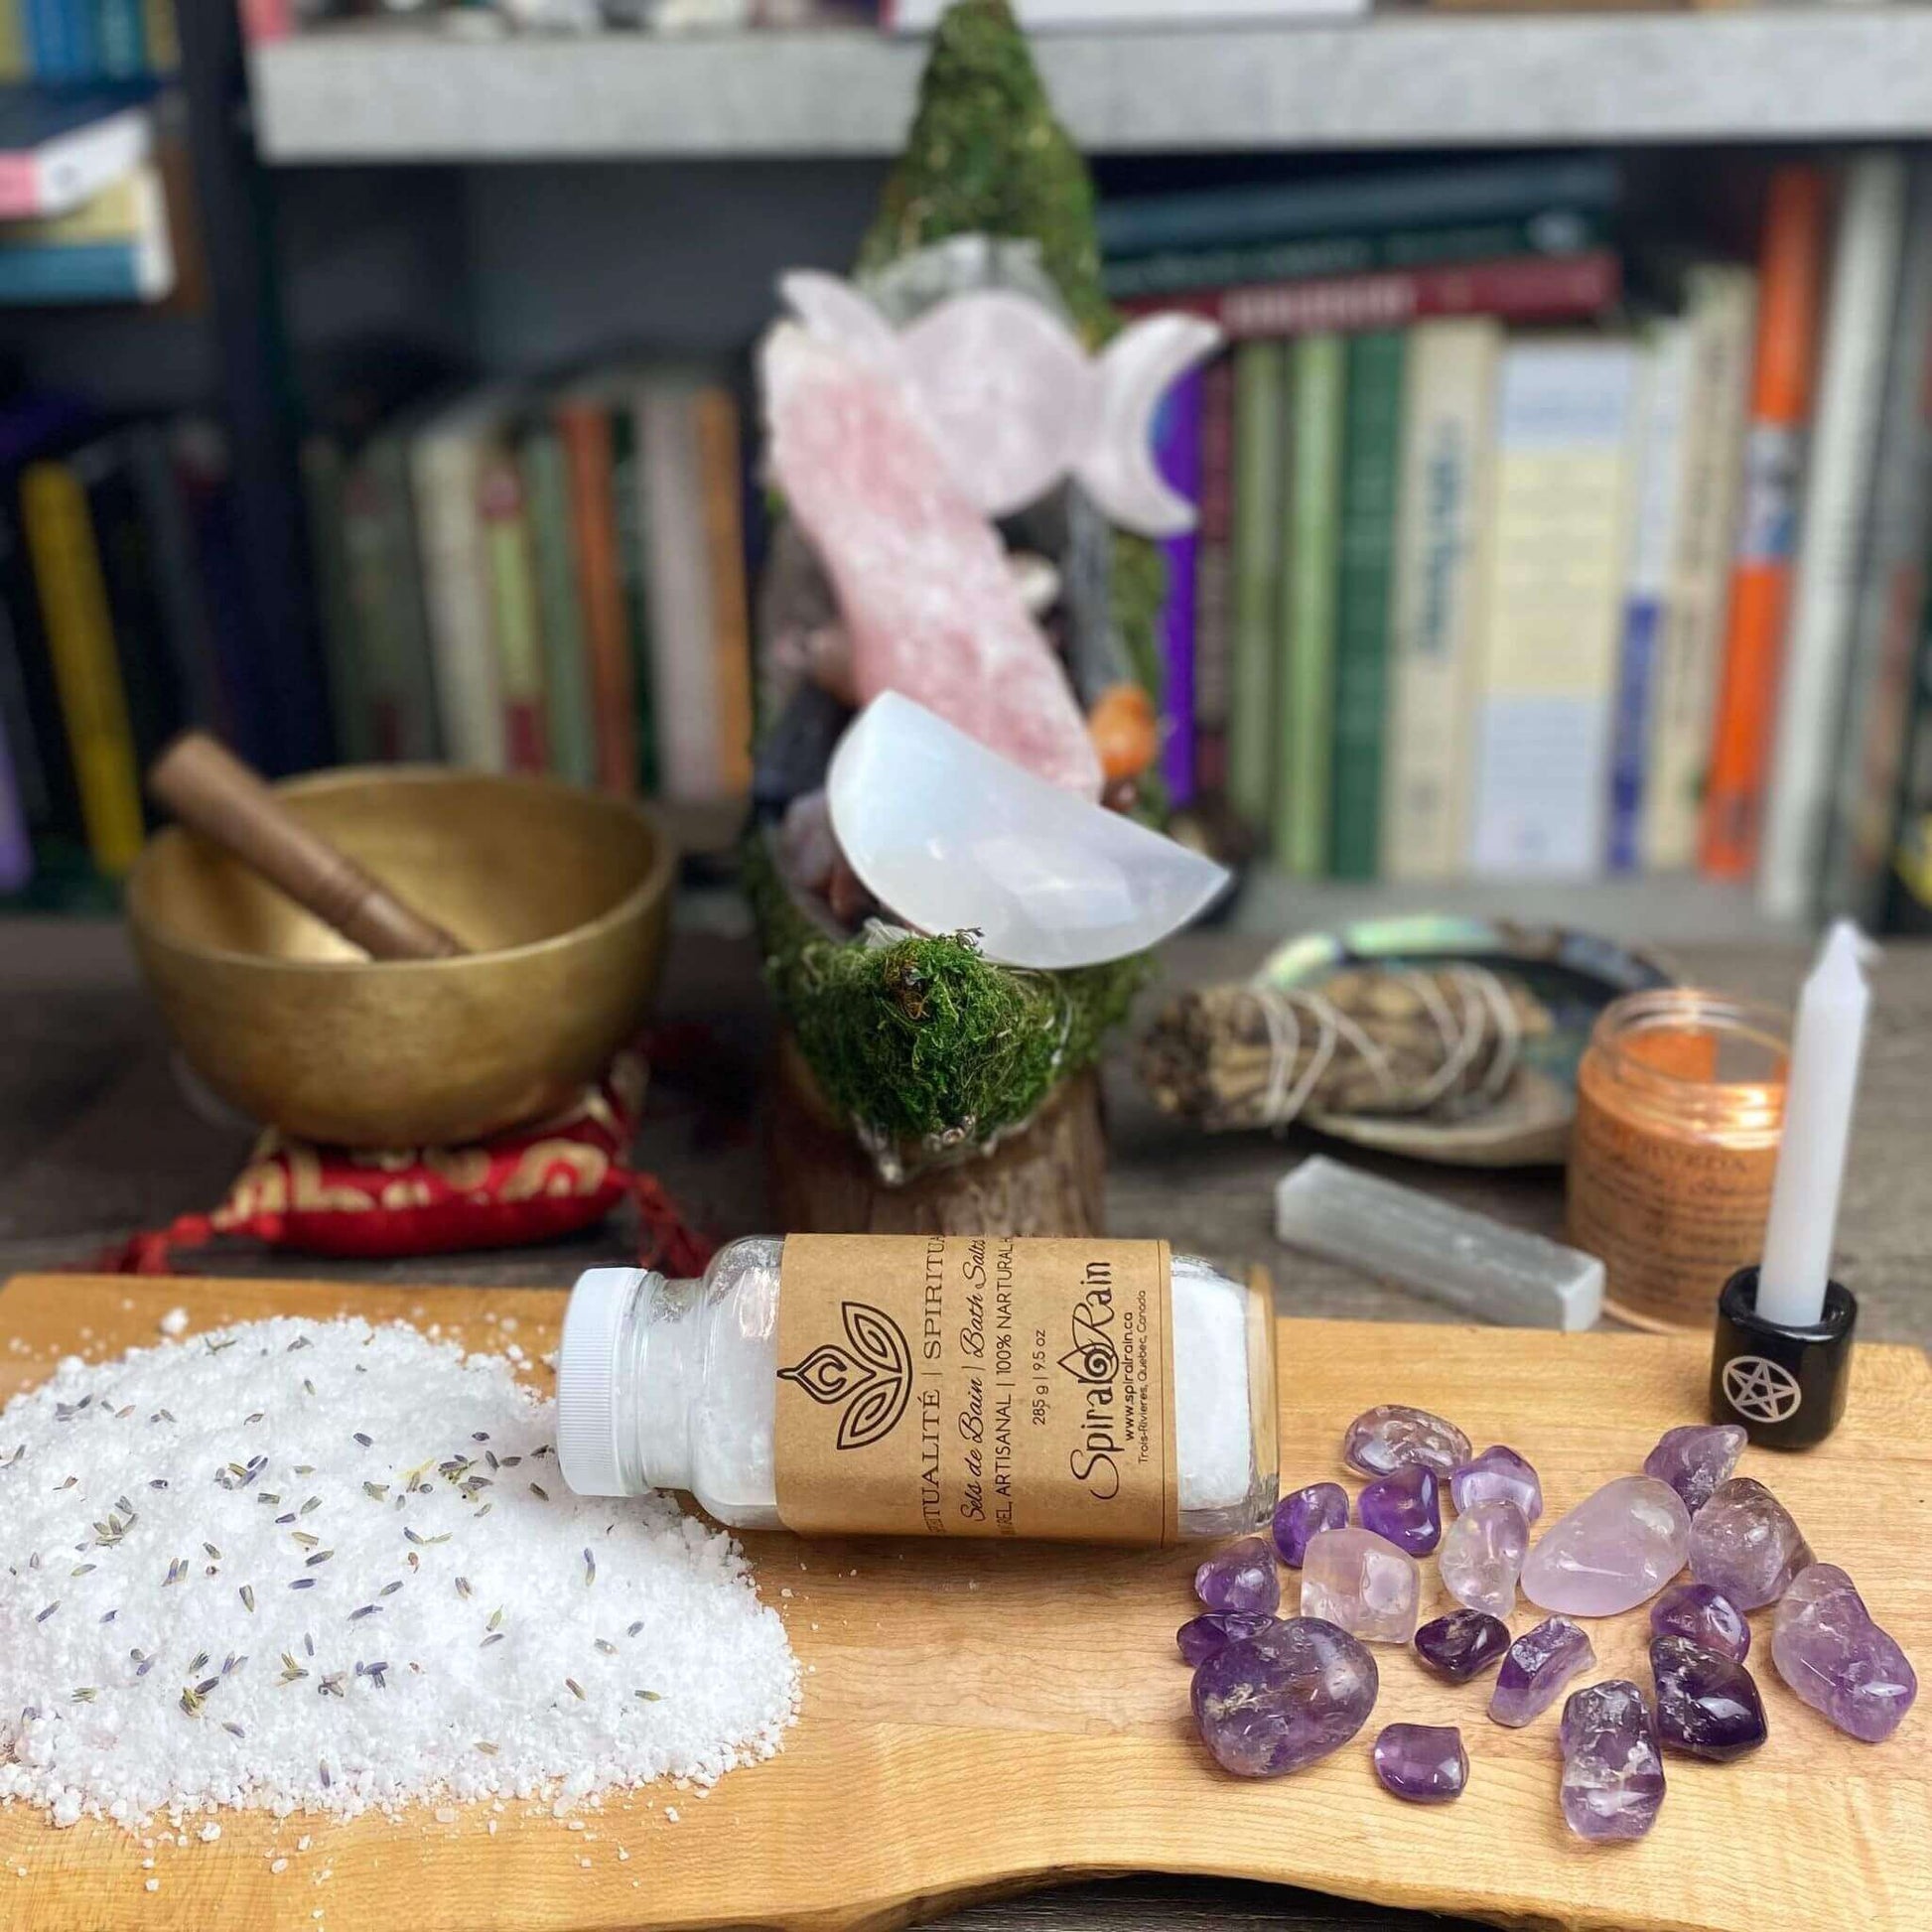 Spirituality Box at $85 only from Spiral Rain